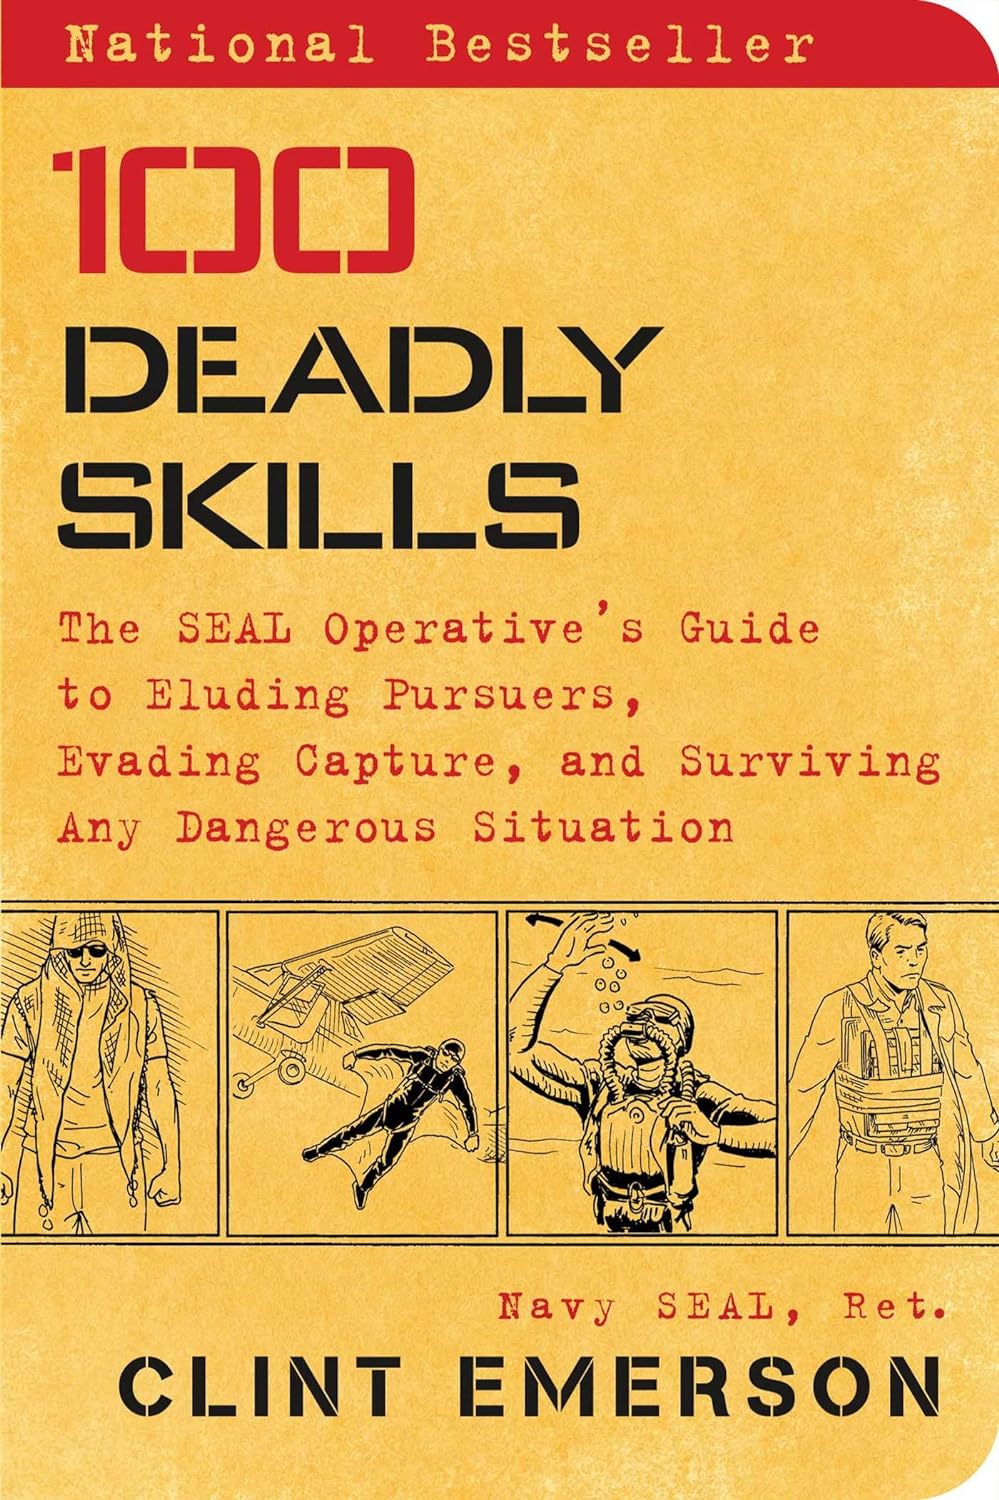 100 DEADLY SKILLS Book by Clint Emerson ebook